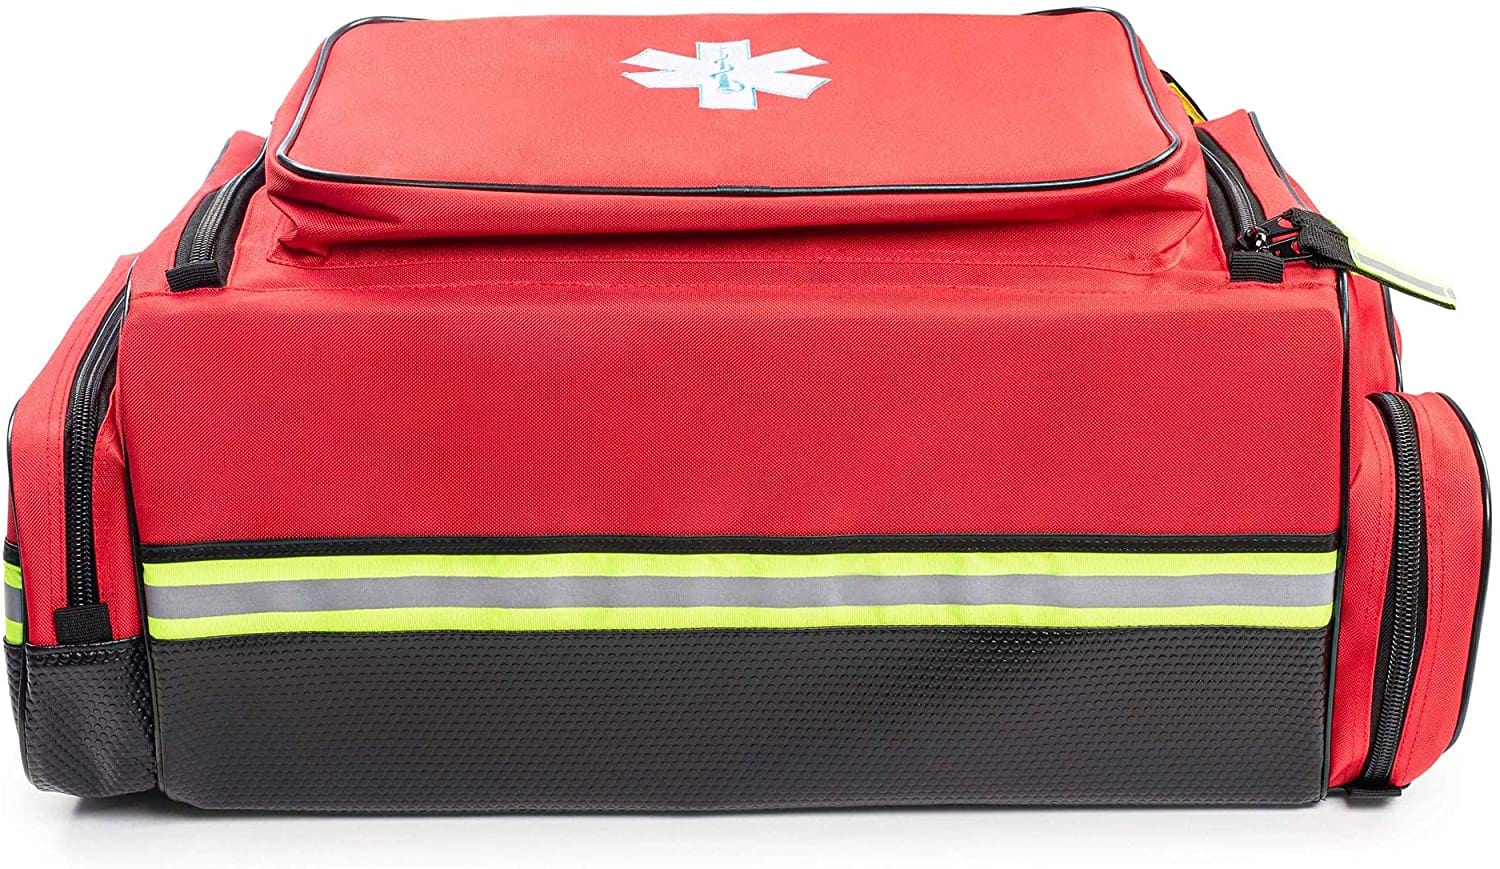 Chief Miller First Aid Kits Scherber Ultimate First Responder Trauma kit O2 W/Bleeding Control - Fully Stocked Apparel